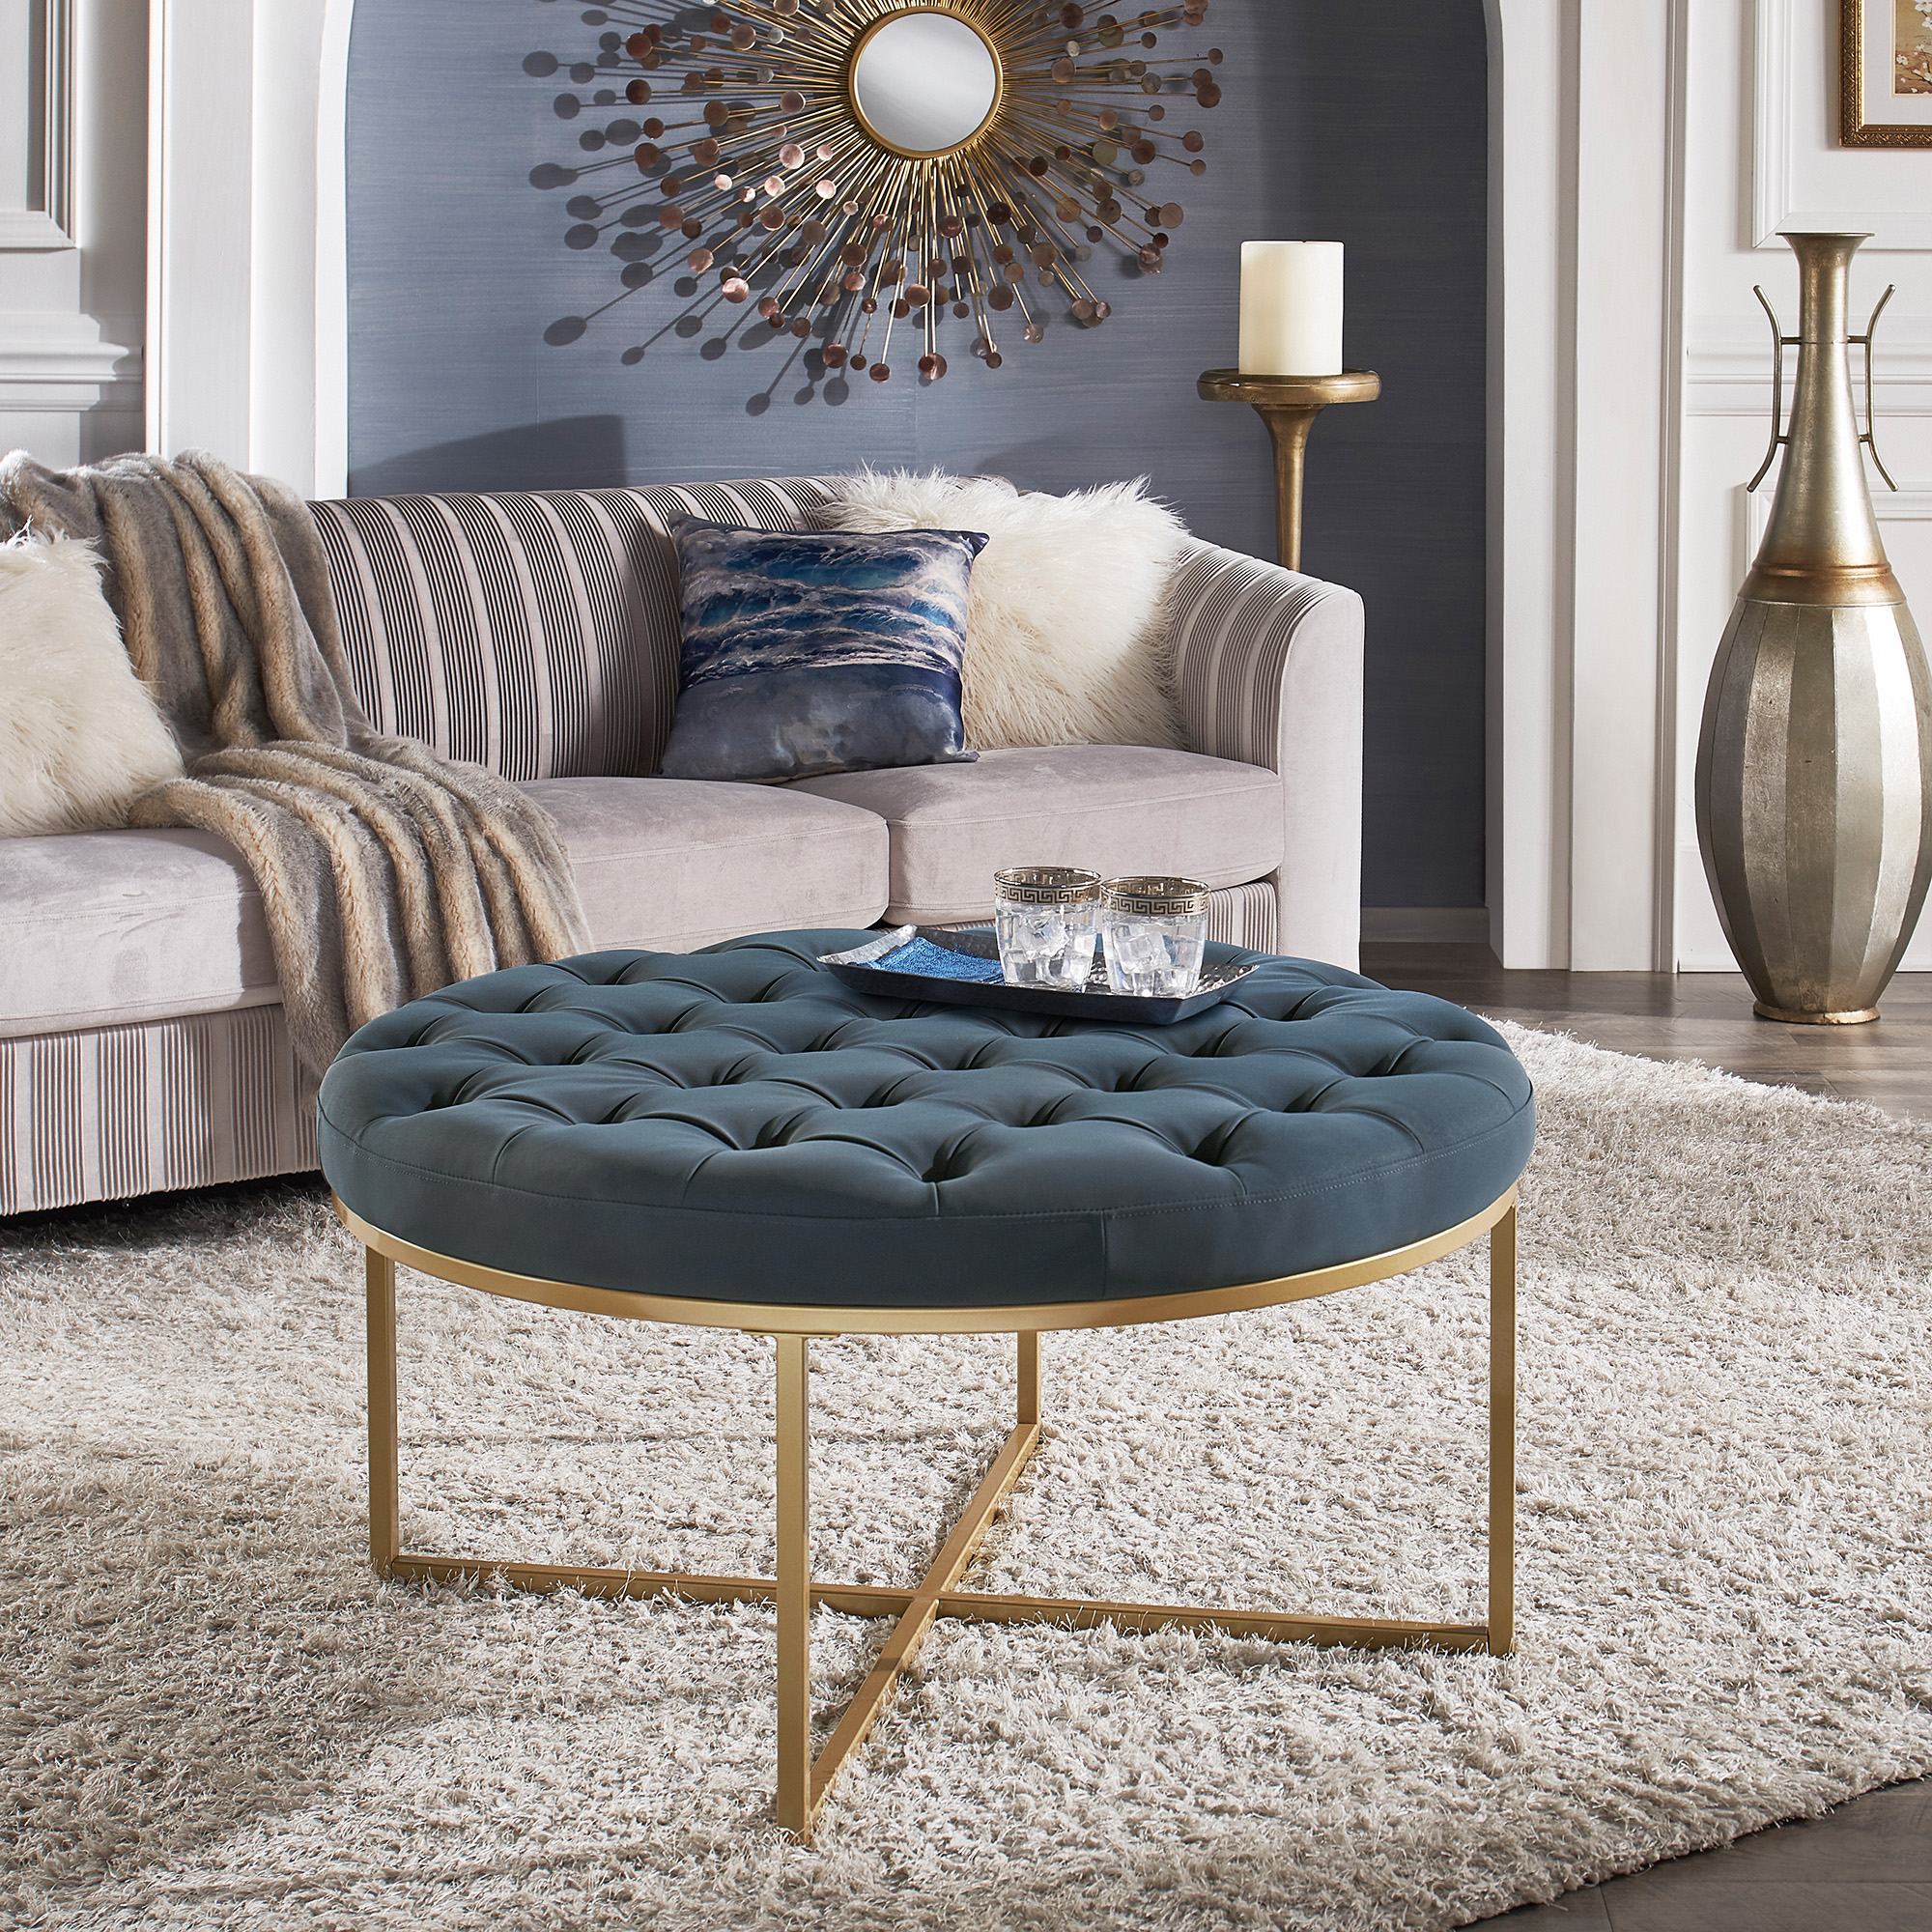 Faux Leather Tufted Round Ottoman